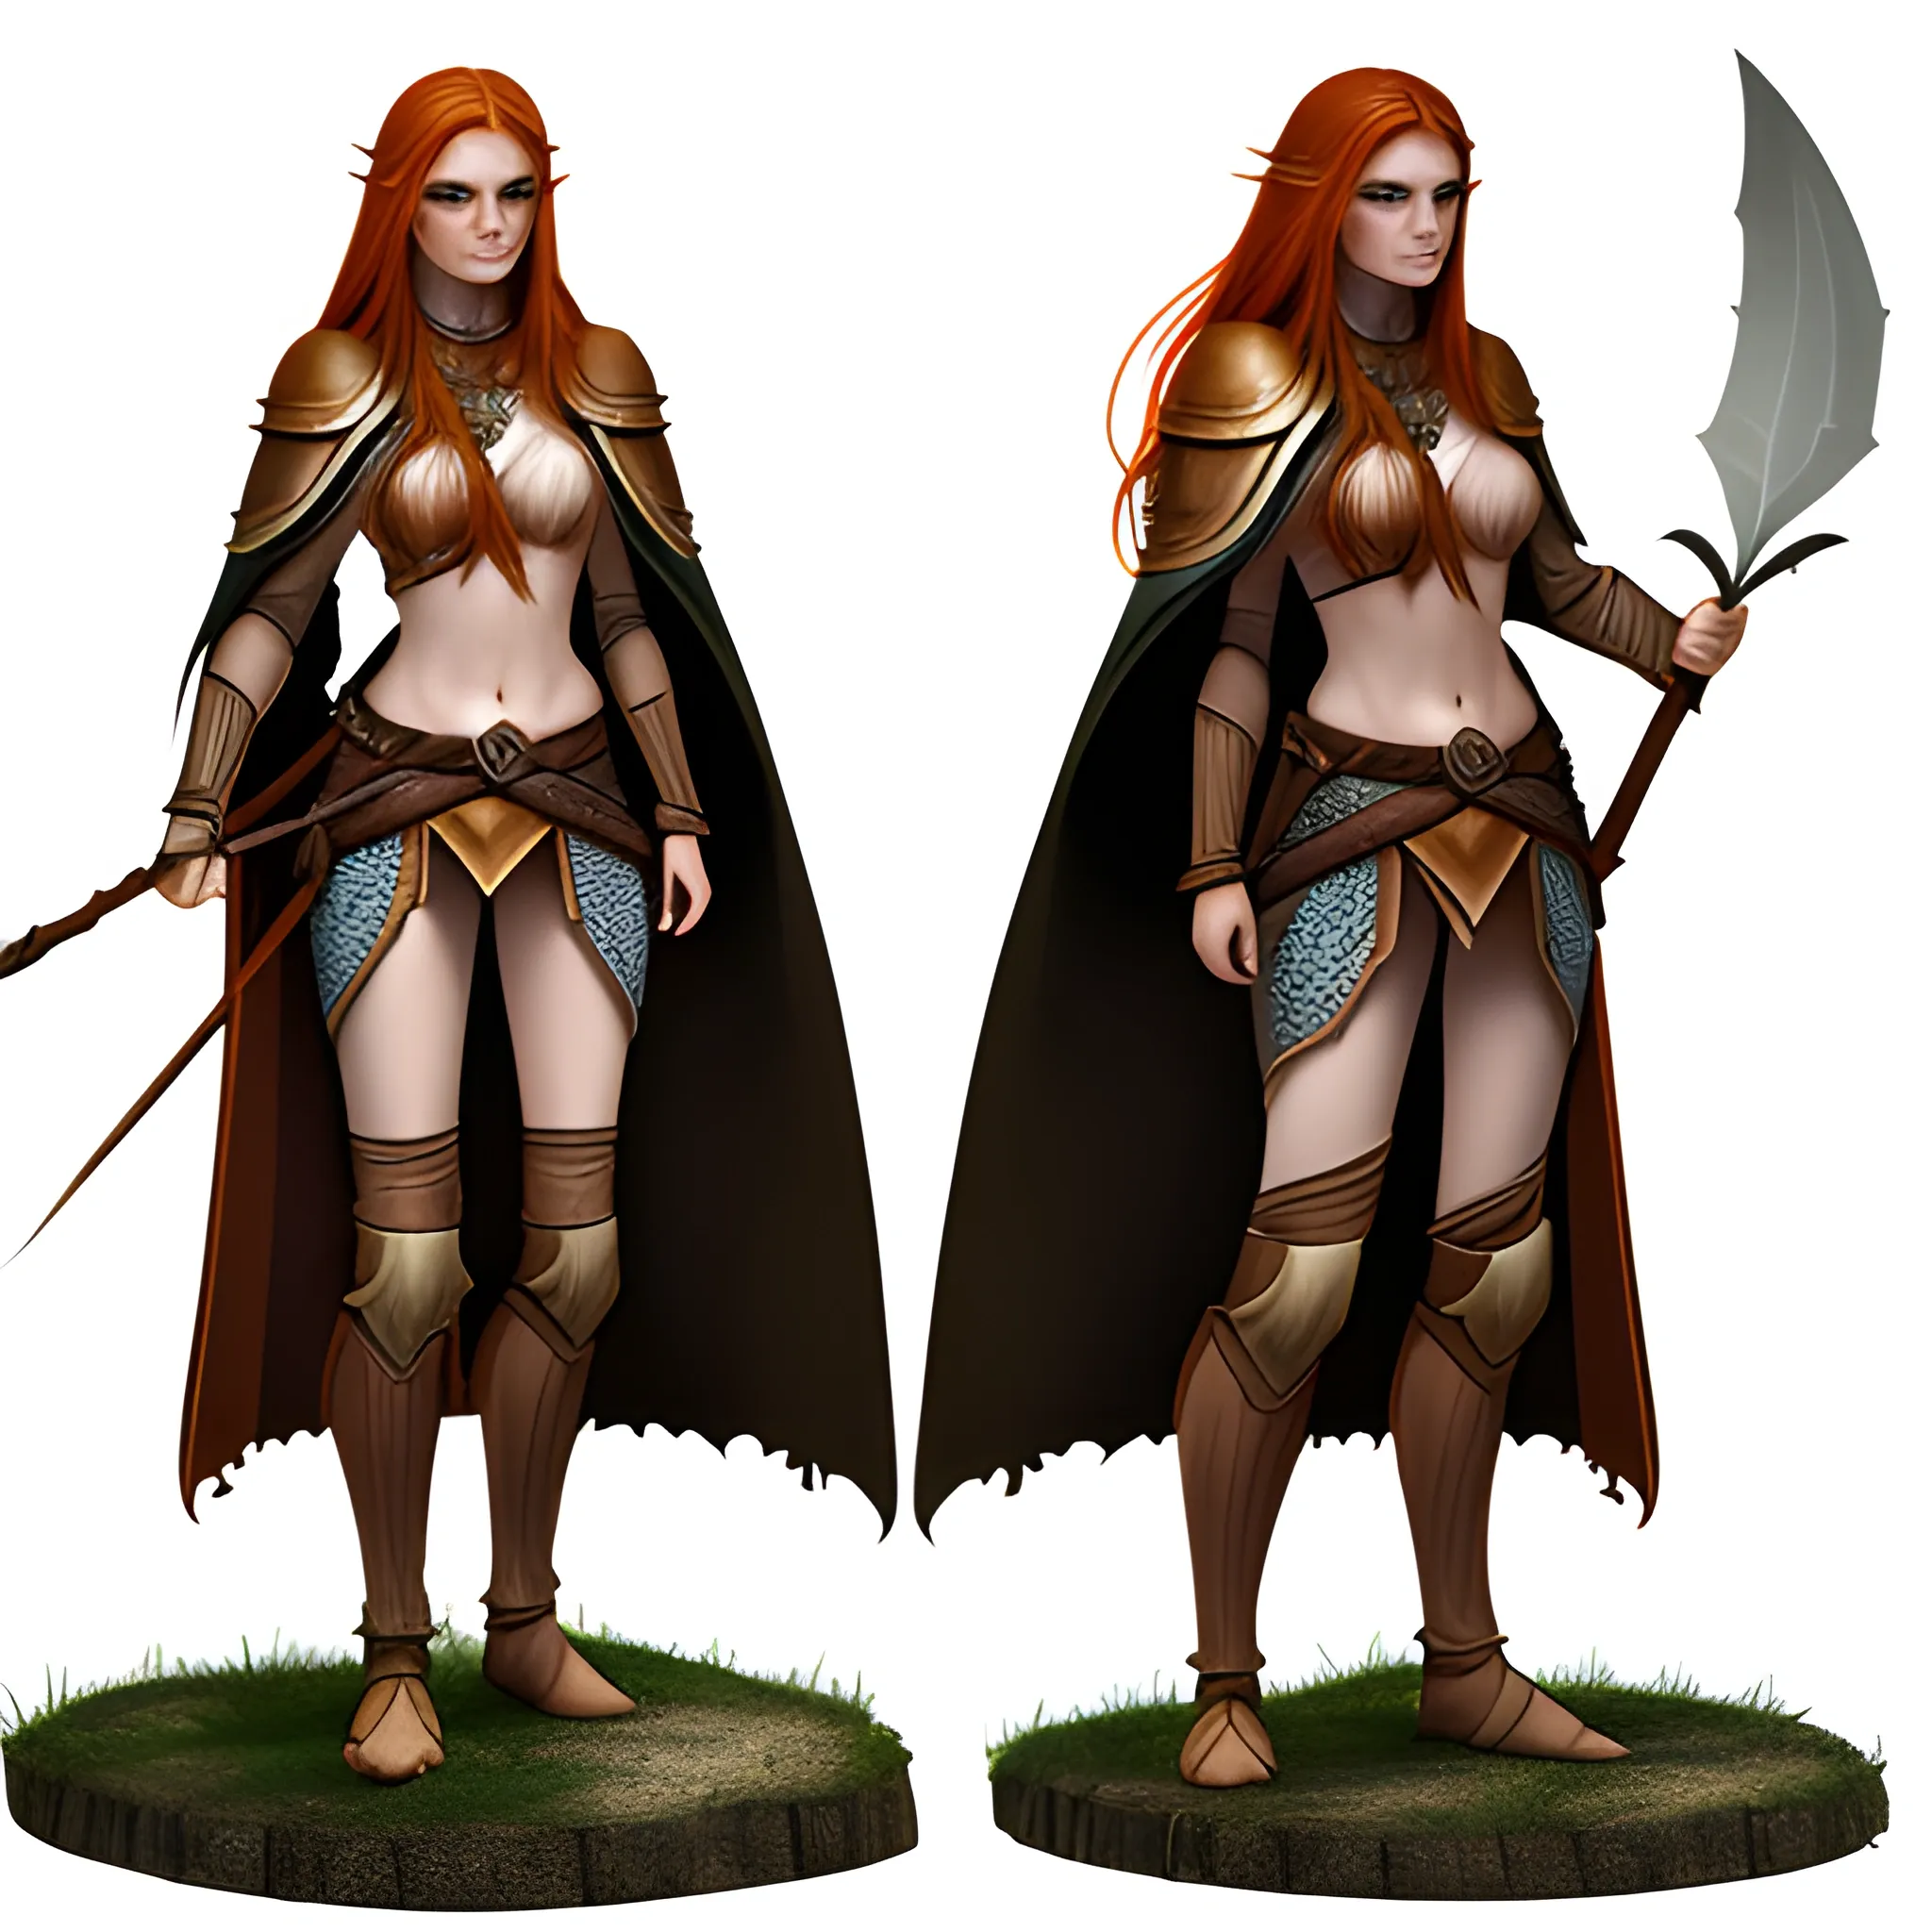 Wood Elf, Female, Concept Art, Front and Side view, Ginger hair, long hair, with spear, leather armor, mail armor on the shoulders, with cloak on the back, Dungeons and Dragons